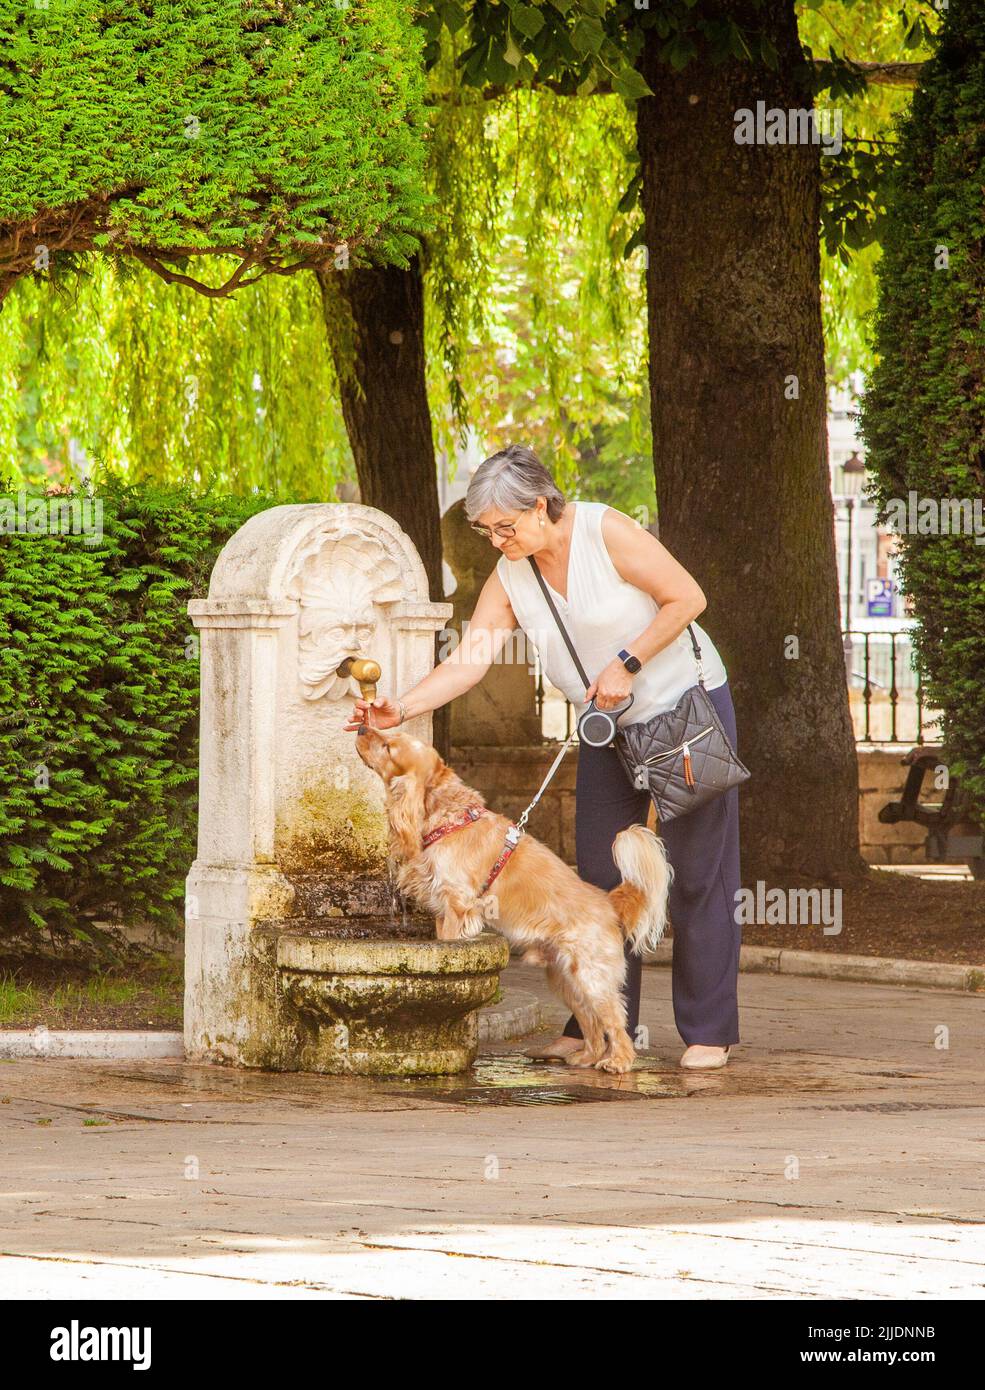 Dog drinking from a water fountain in the Spanish city of Burgos Spain Stock Photo